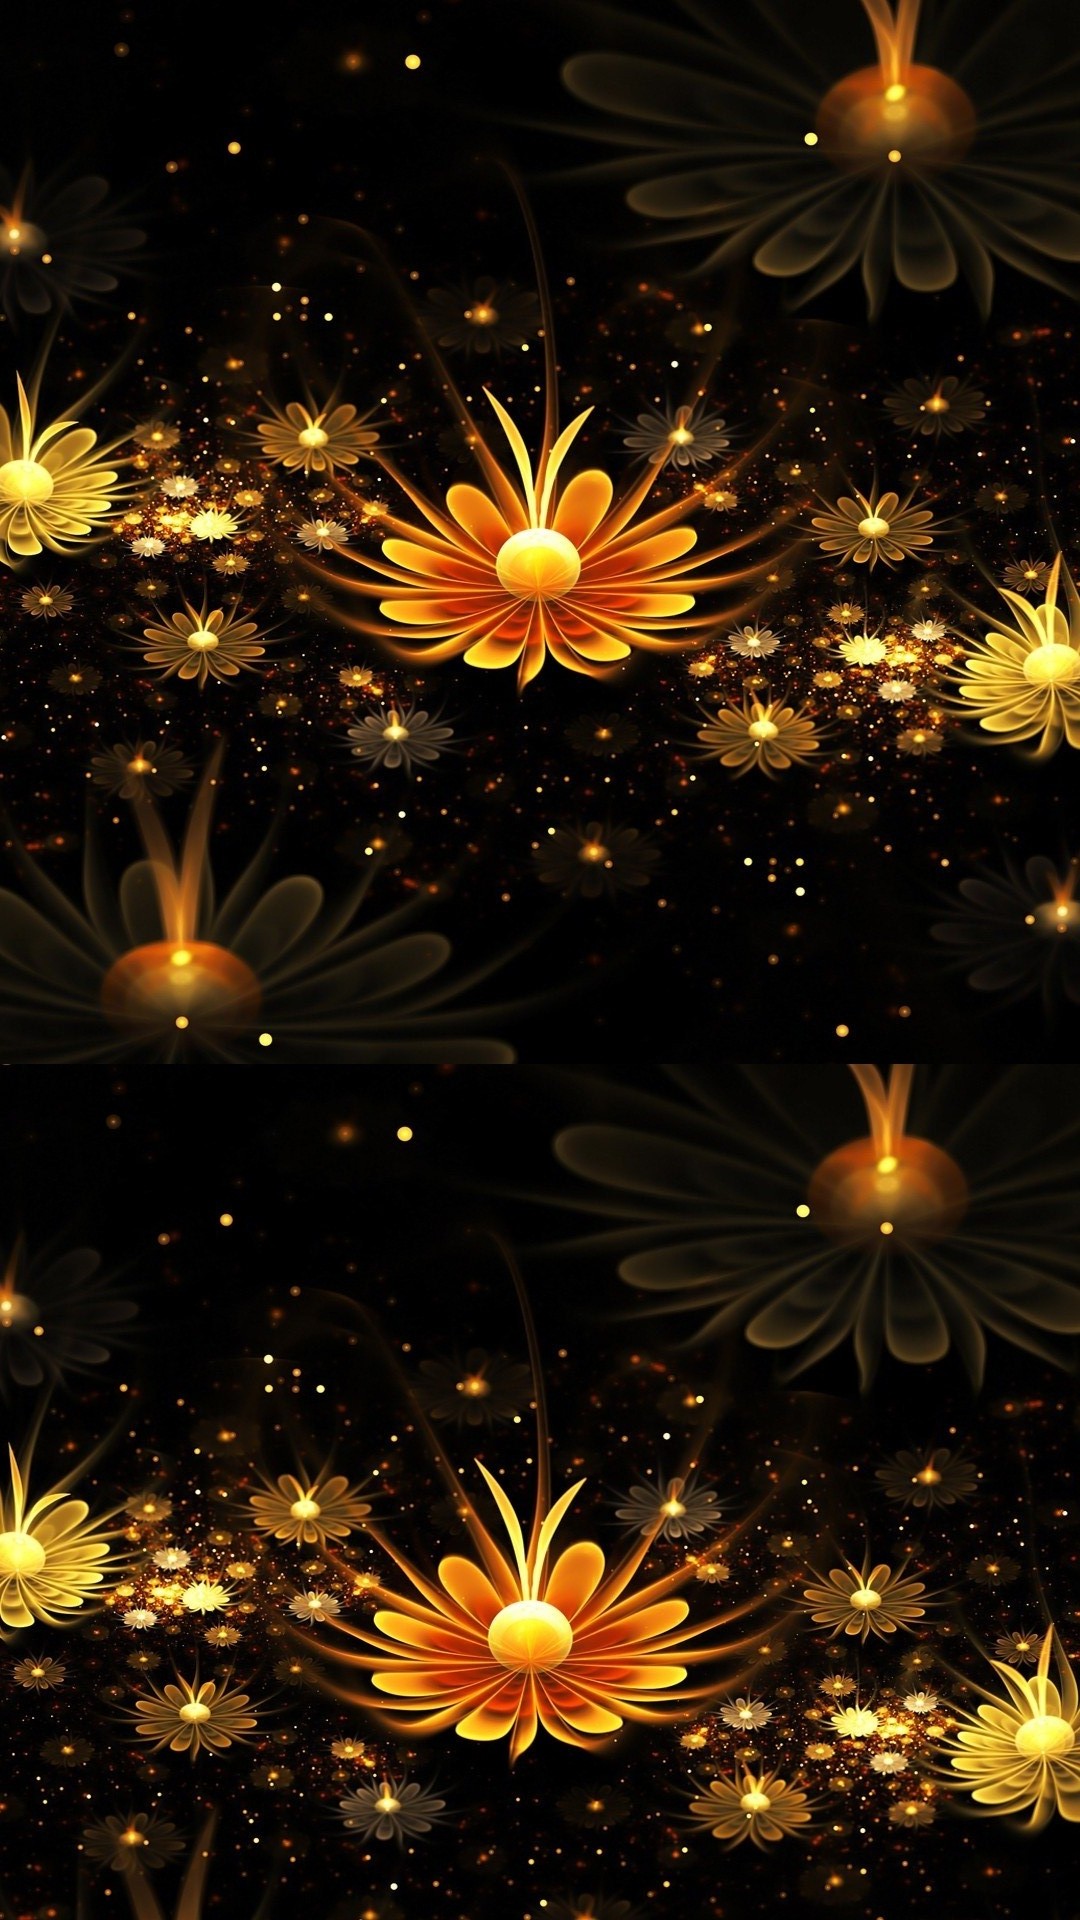 3D Flower Wallpaper For Mobile Android 1080x1920